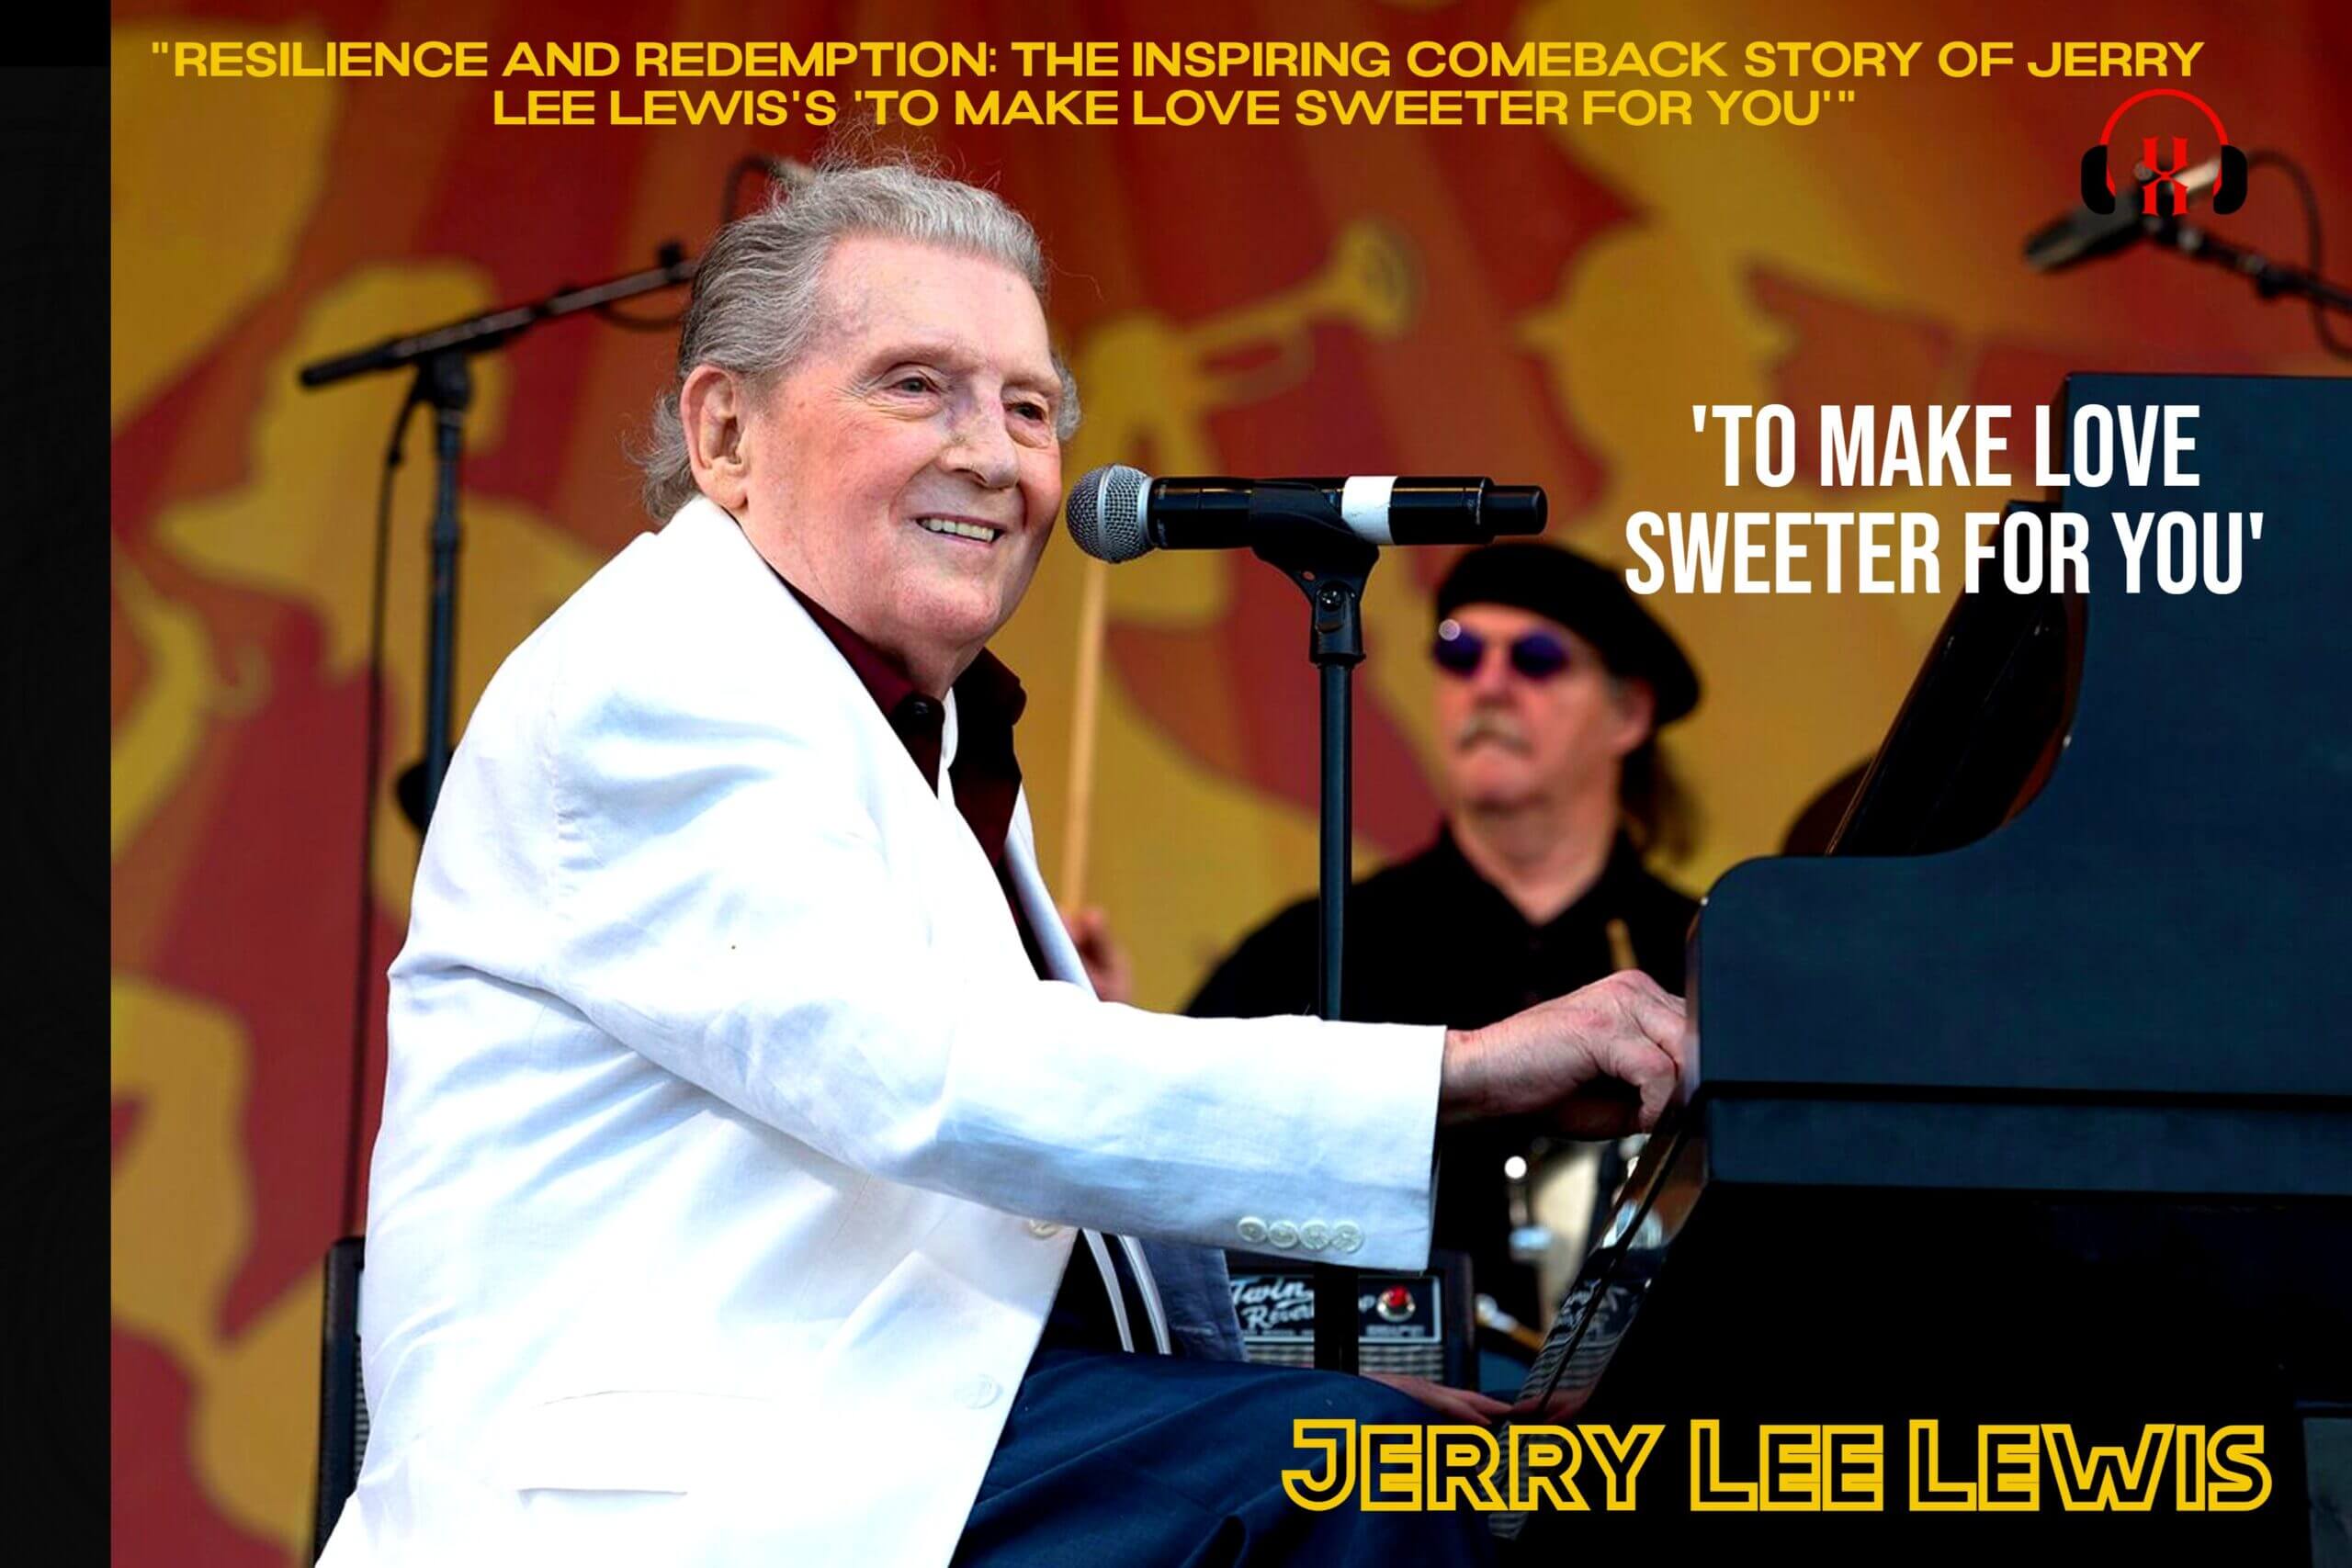 Jerry Lee Lewis's 'To Make Love Sweeter For You'"